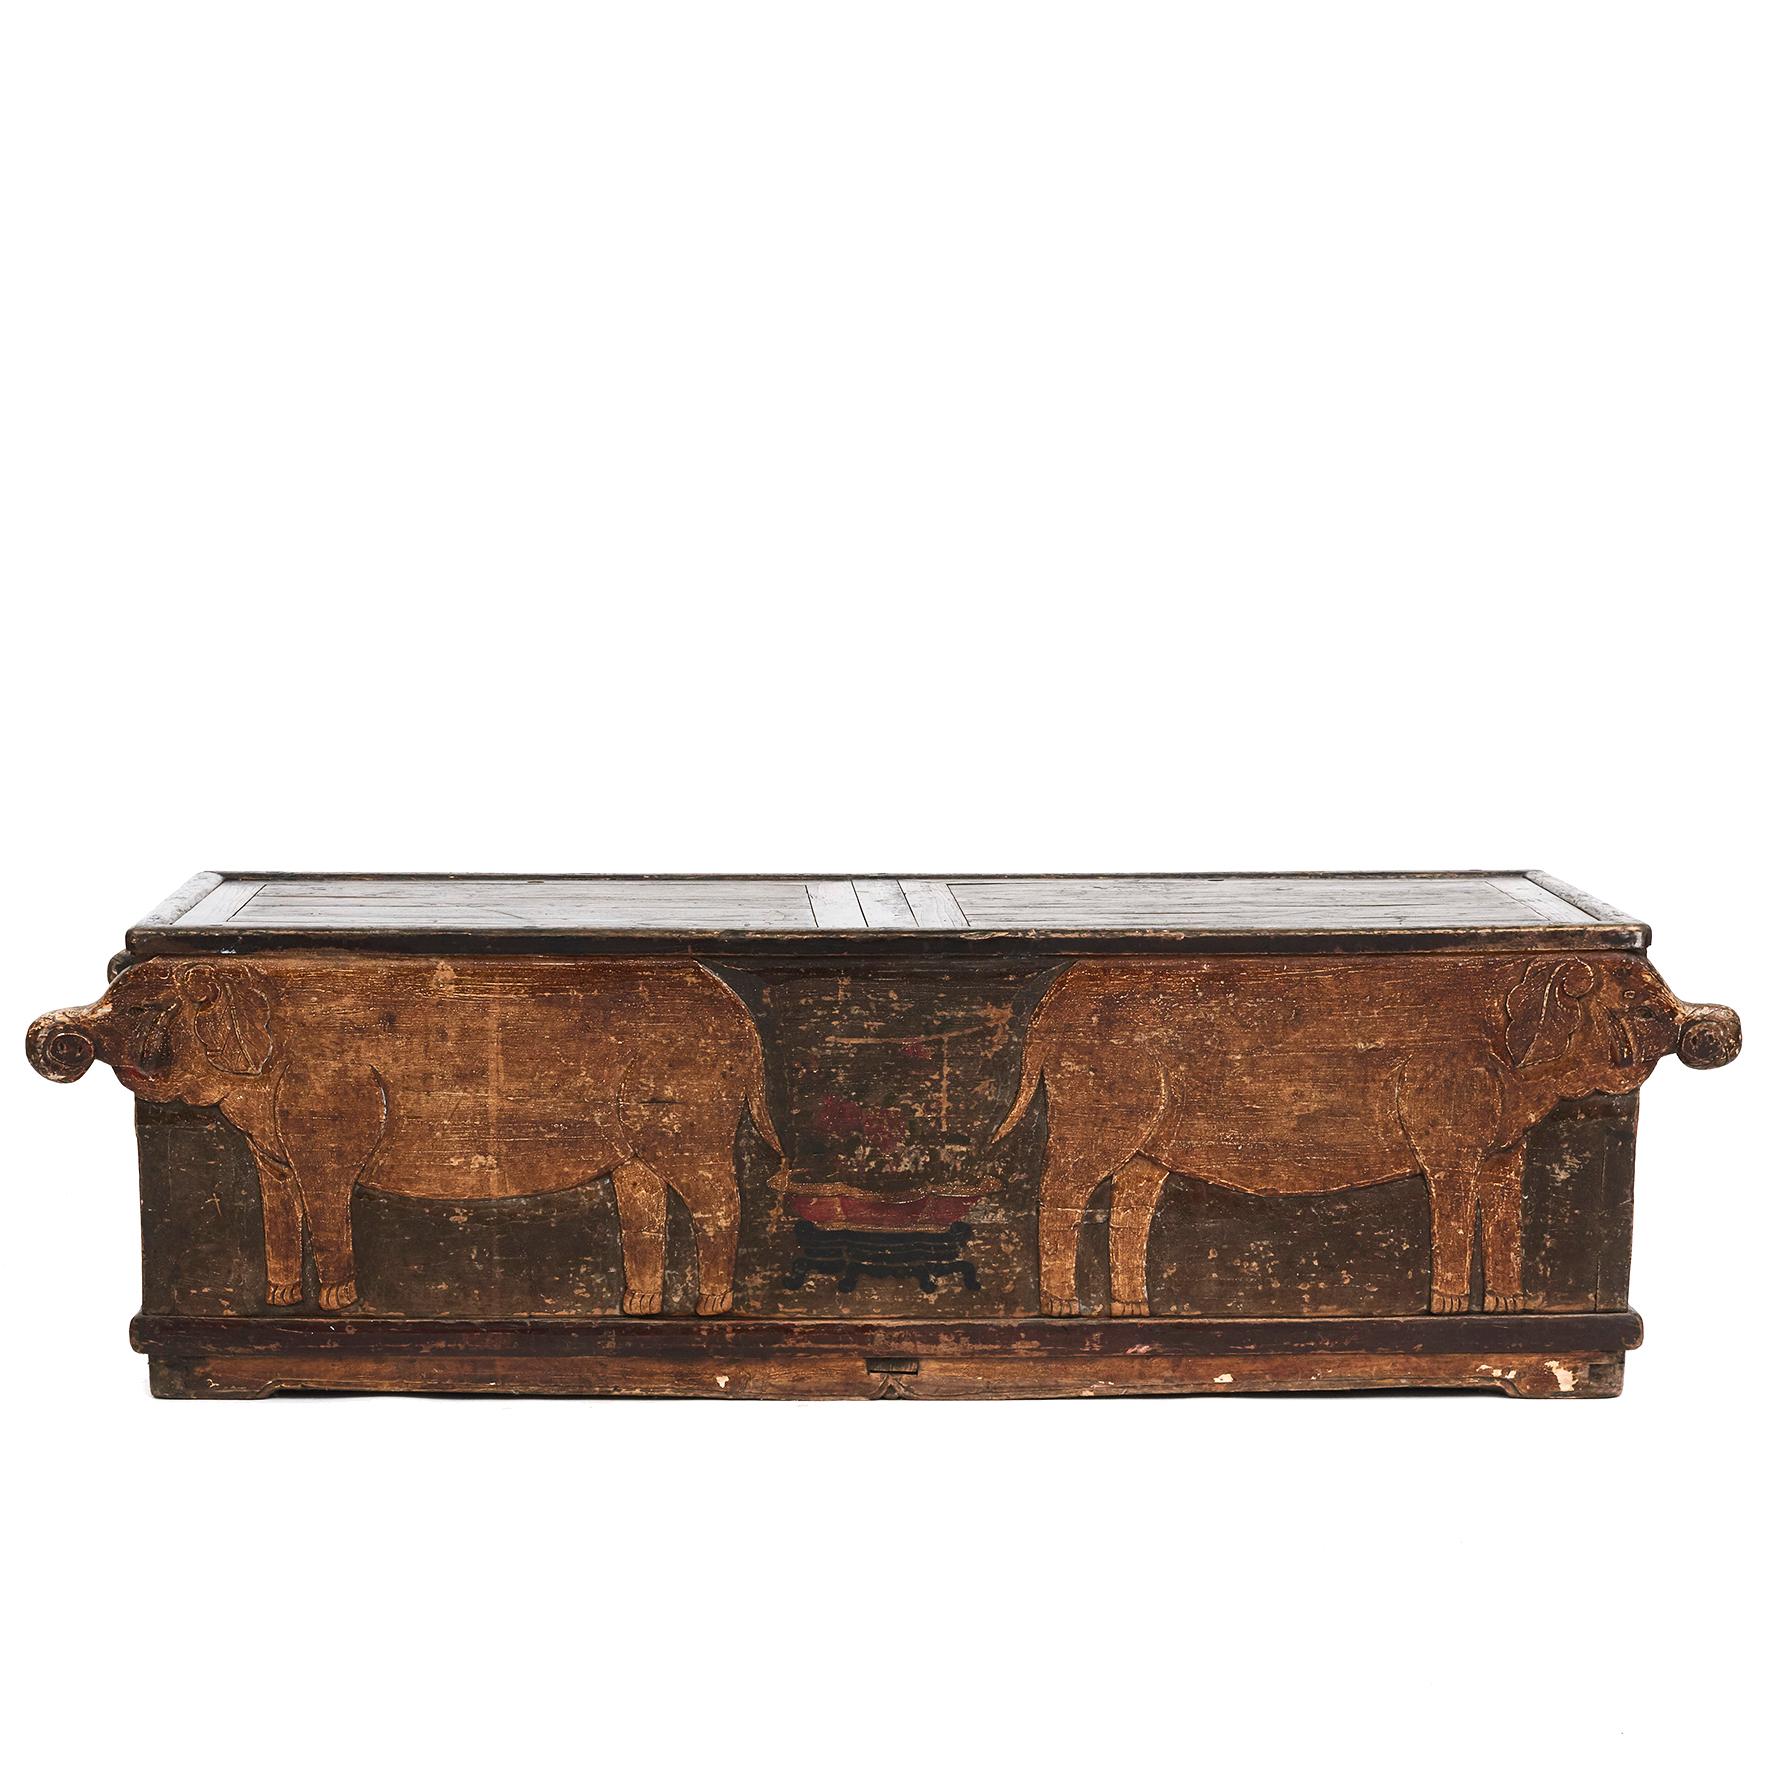 Artistic storage bench, naive and charming in its design. Shape of elephants in amber lacquer between elephants, at the end decorated with vases and flowers in polychrome lacquer colors. Two lids on top of the bench
Untouched original condition